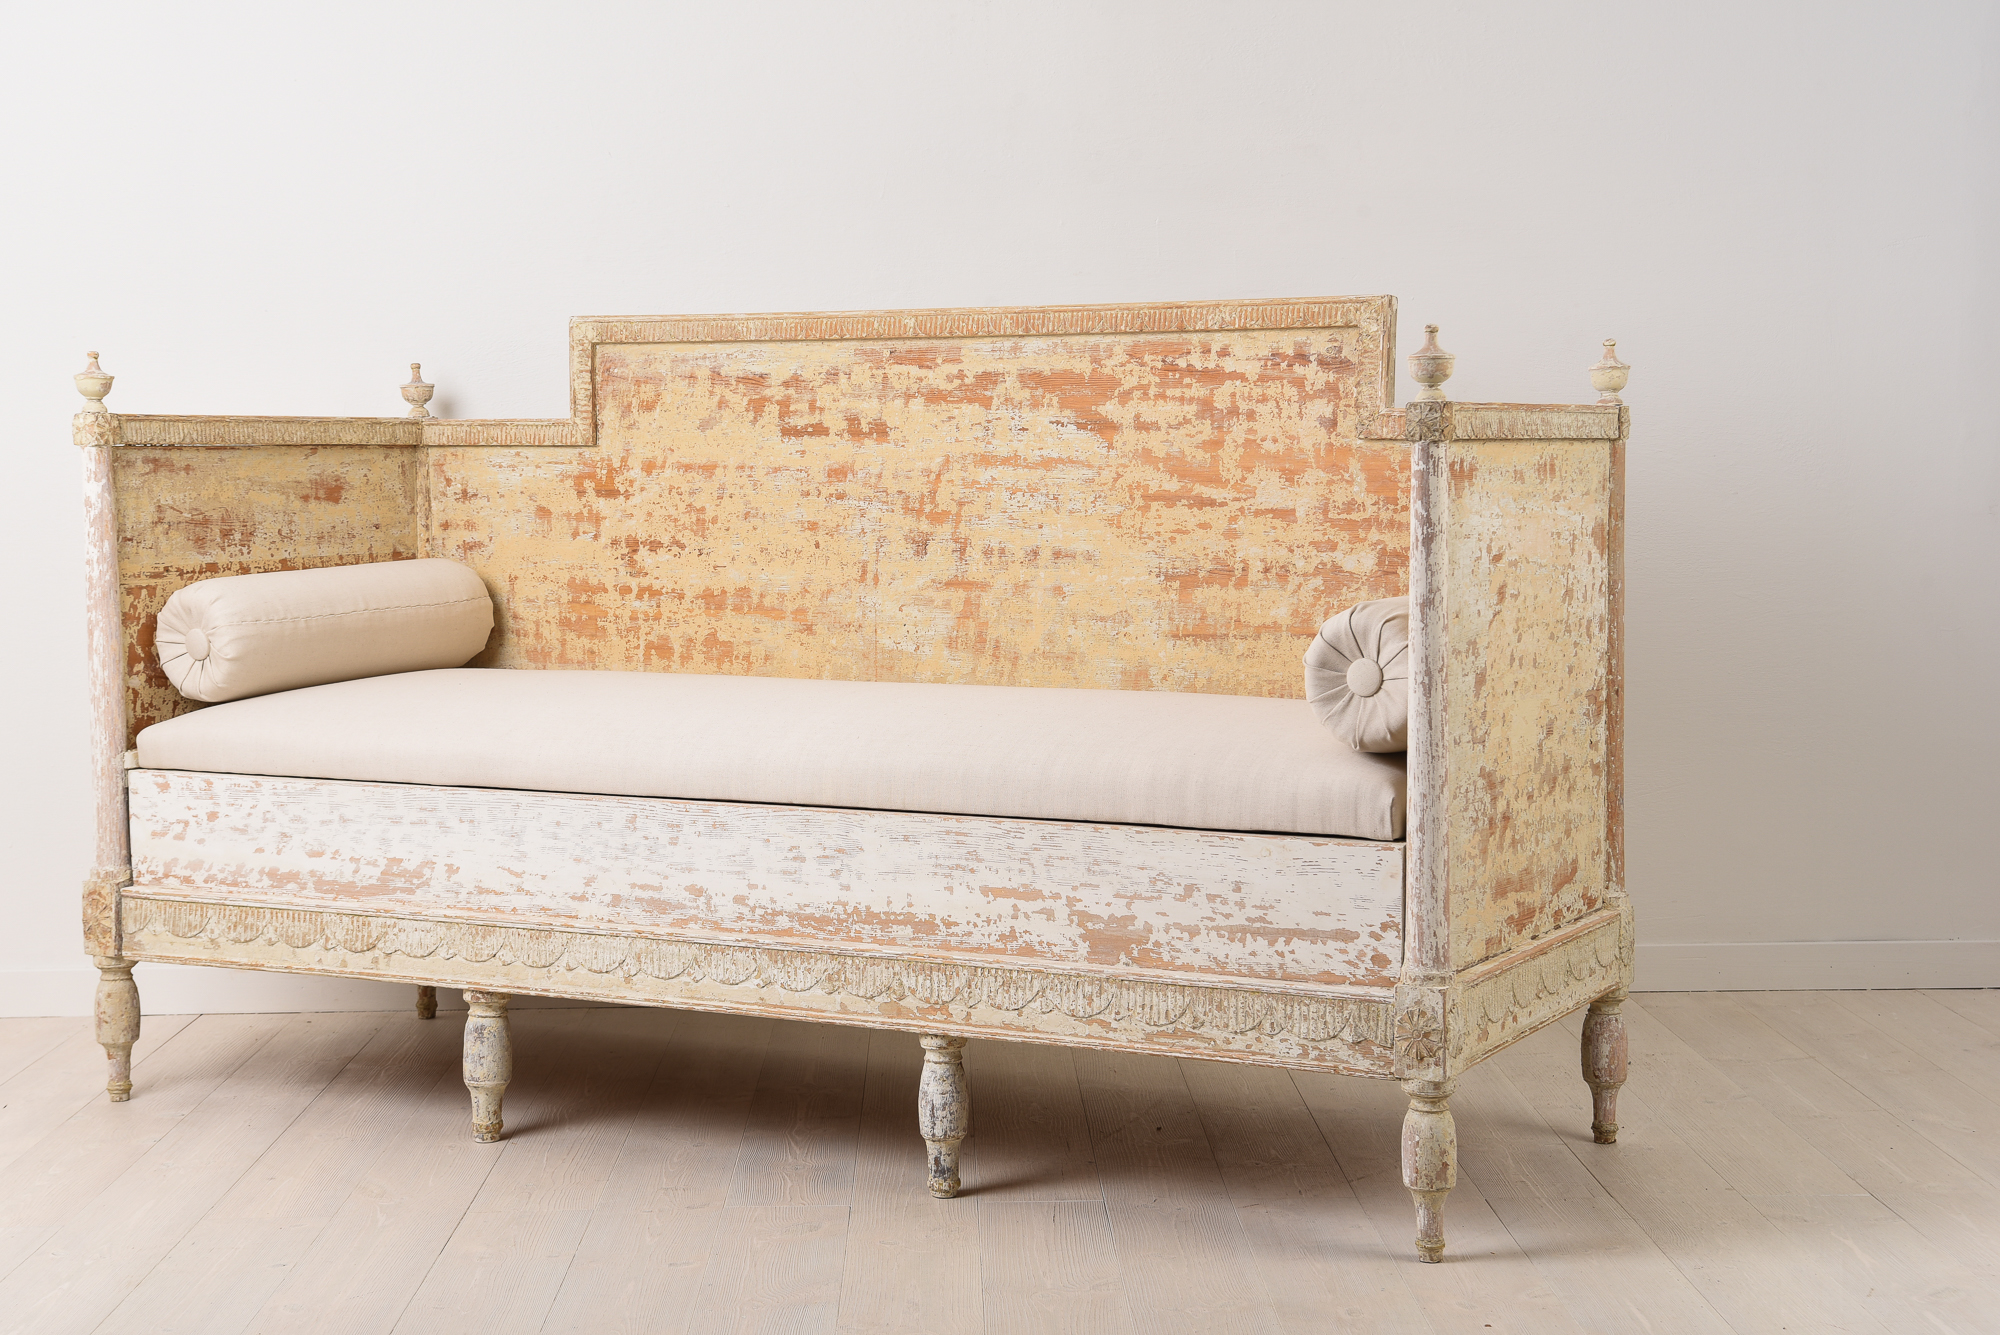 Gustavian sofa in painted pine. It has the original paint with natural distress and wear due to time. Hand carved wooden decor